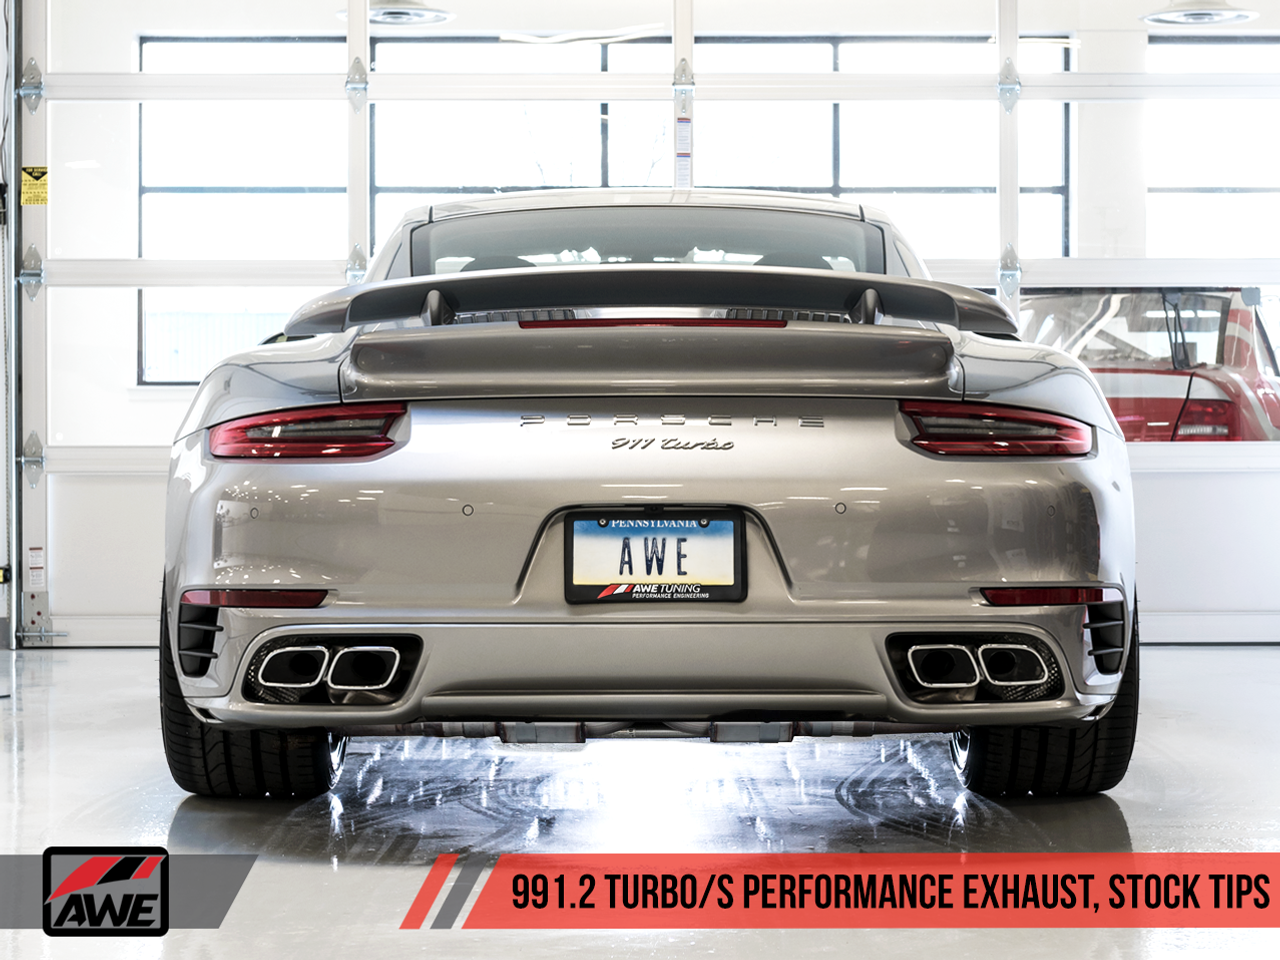 AWE Tuning Performance Exhaust and High-Flow Cat Sections for Porsche 991.2 Turbo - Stock Tips